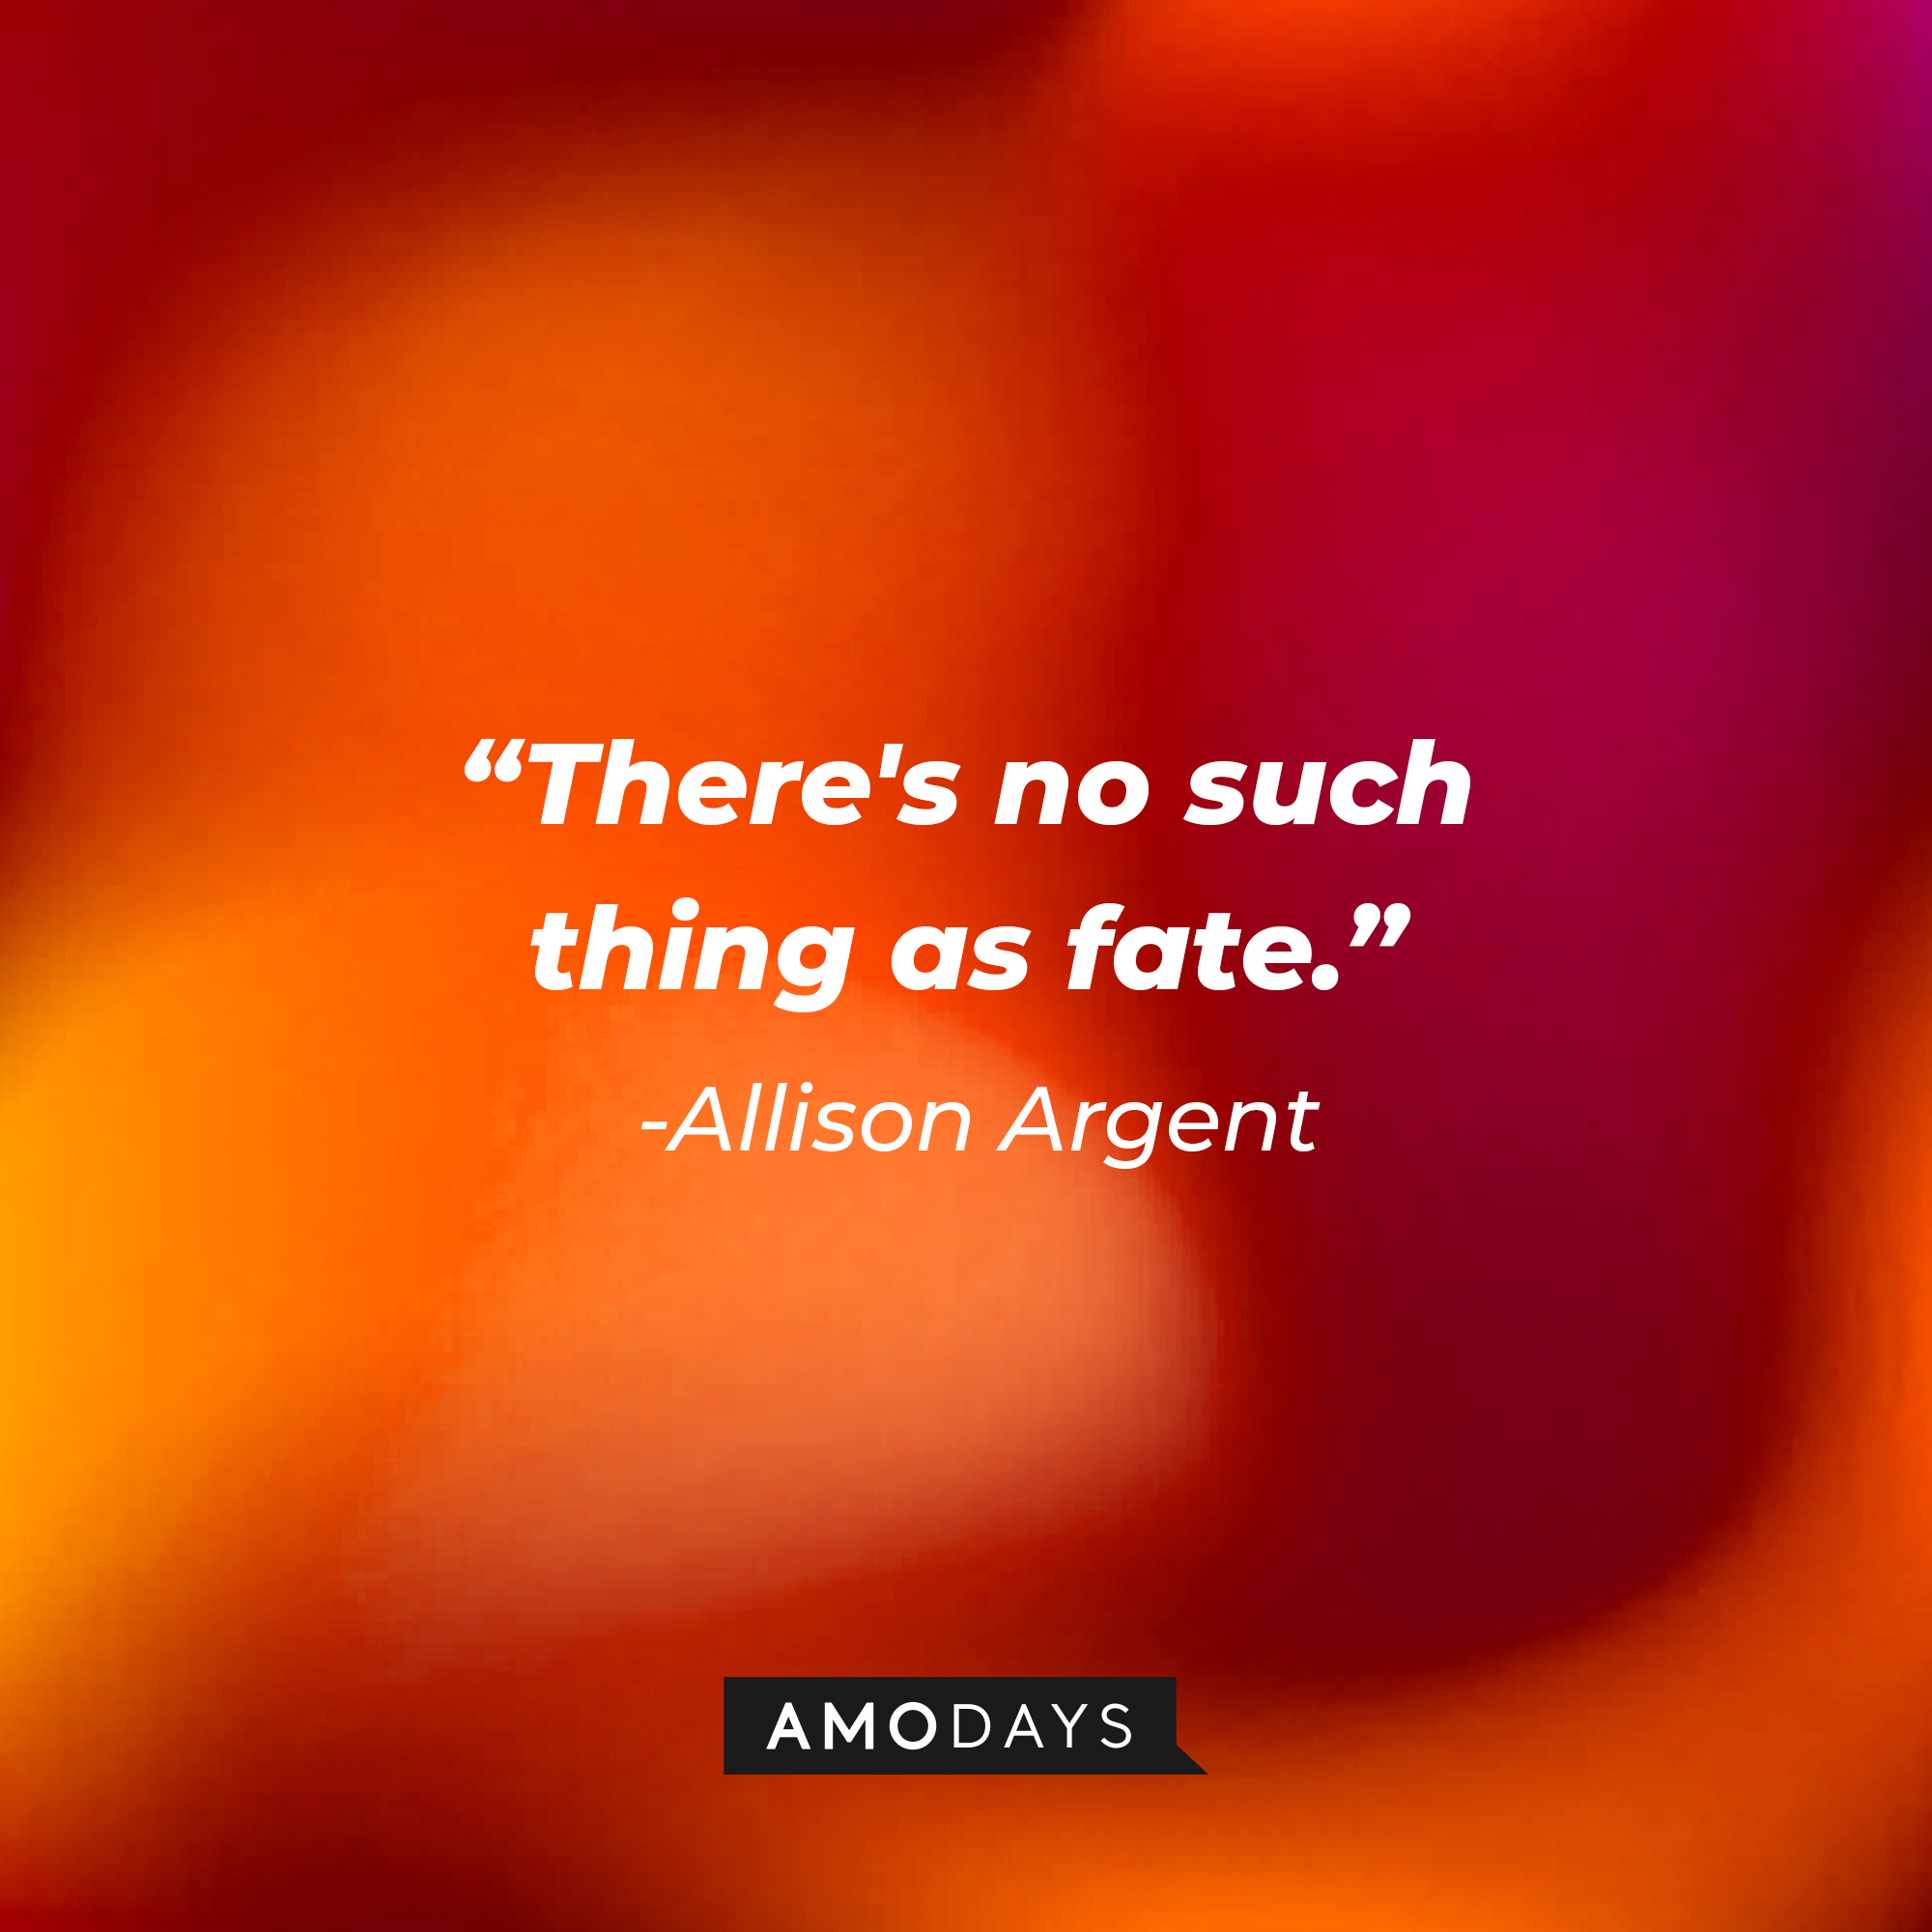 Allison Argen’s quote: “There's no such thing as fate.” | Source: AmoDays